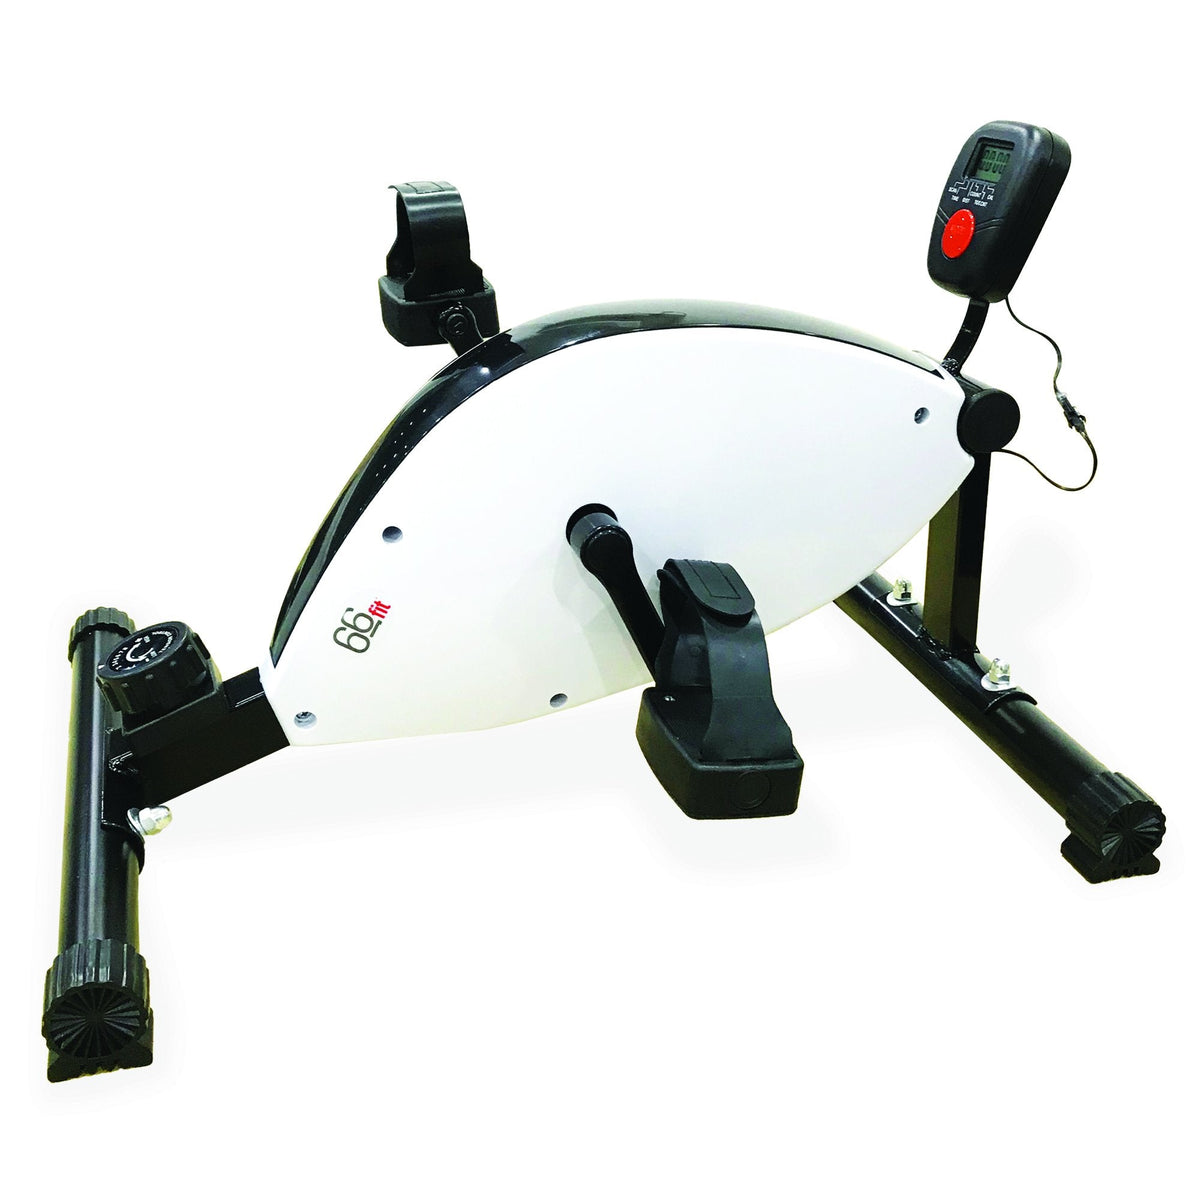 66fit Magnetic Pedal Exerciser